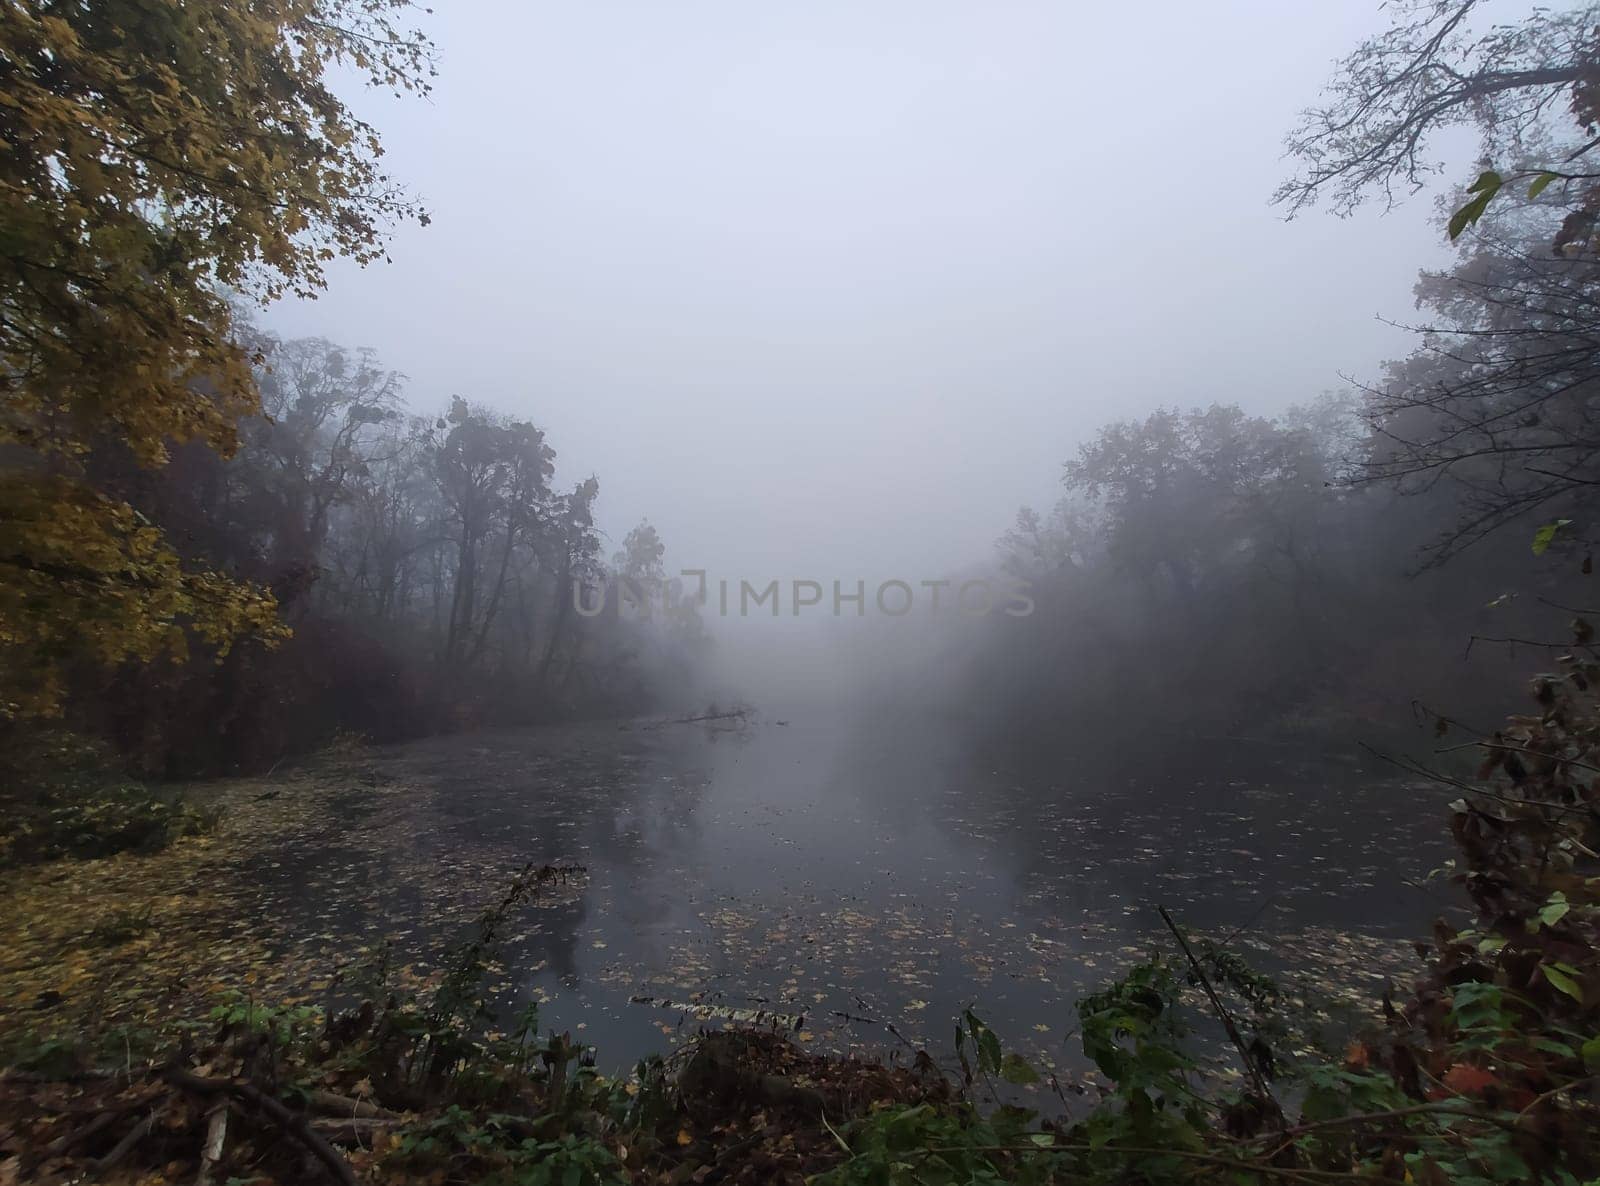 Cinematic shot of a foggy autumn day in a forest by OnPhotoUa